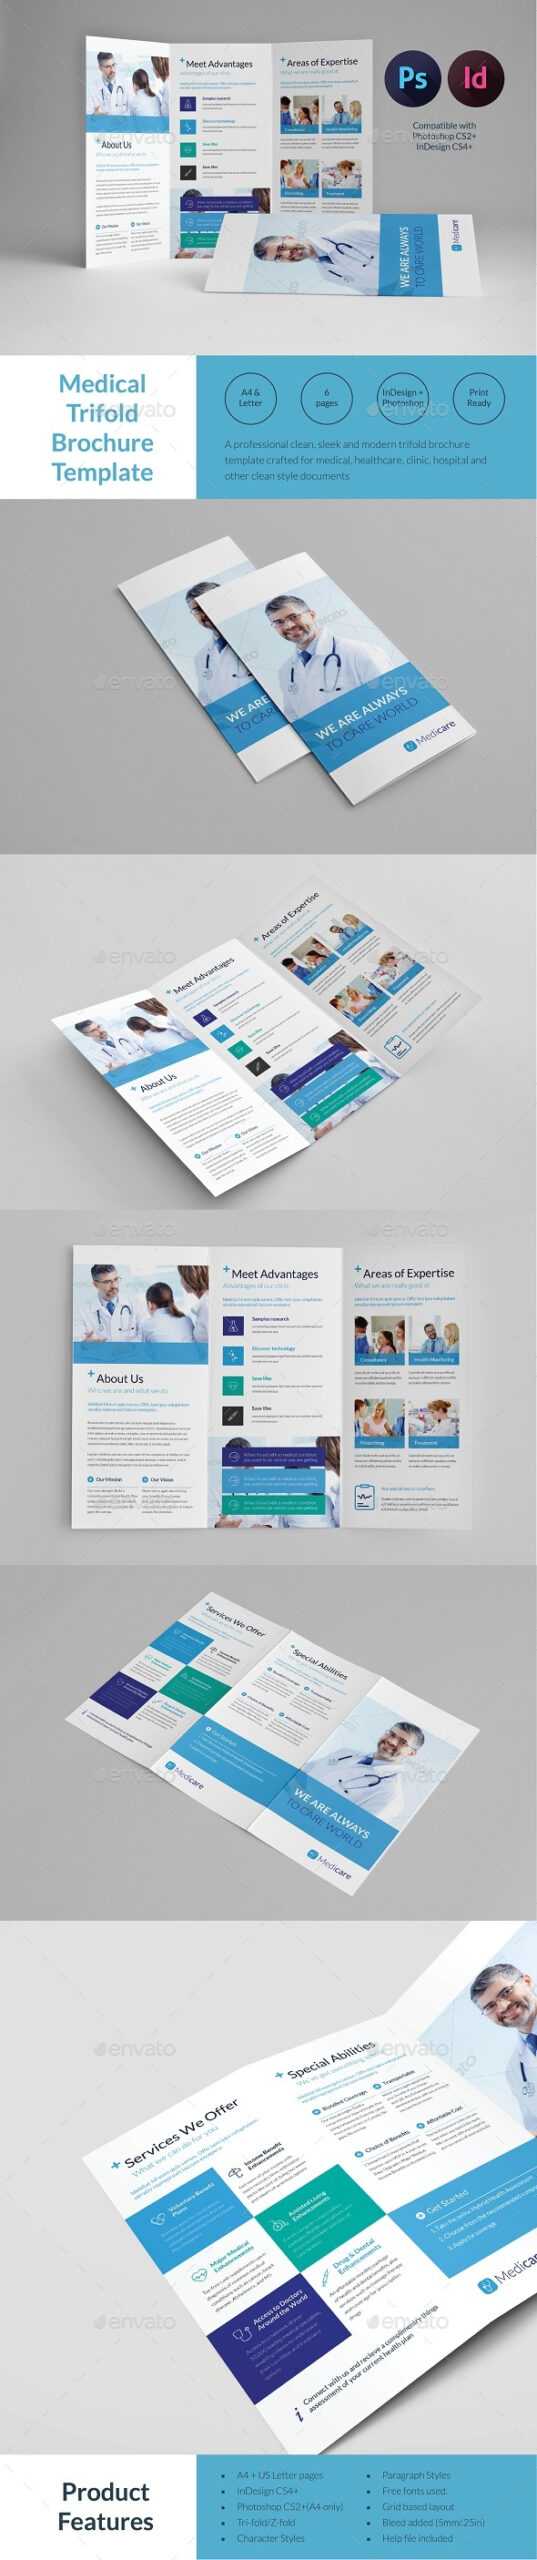 Indesign And Trifold Brochure Templates From Graphicriver Intended For Z Fold Brochure Template Indesign